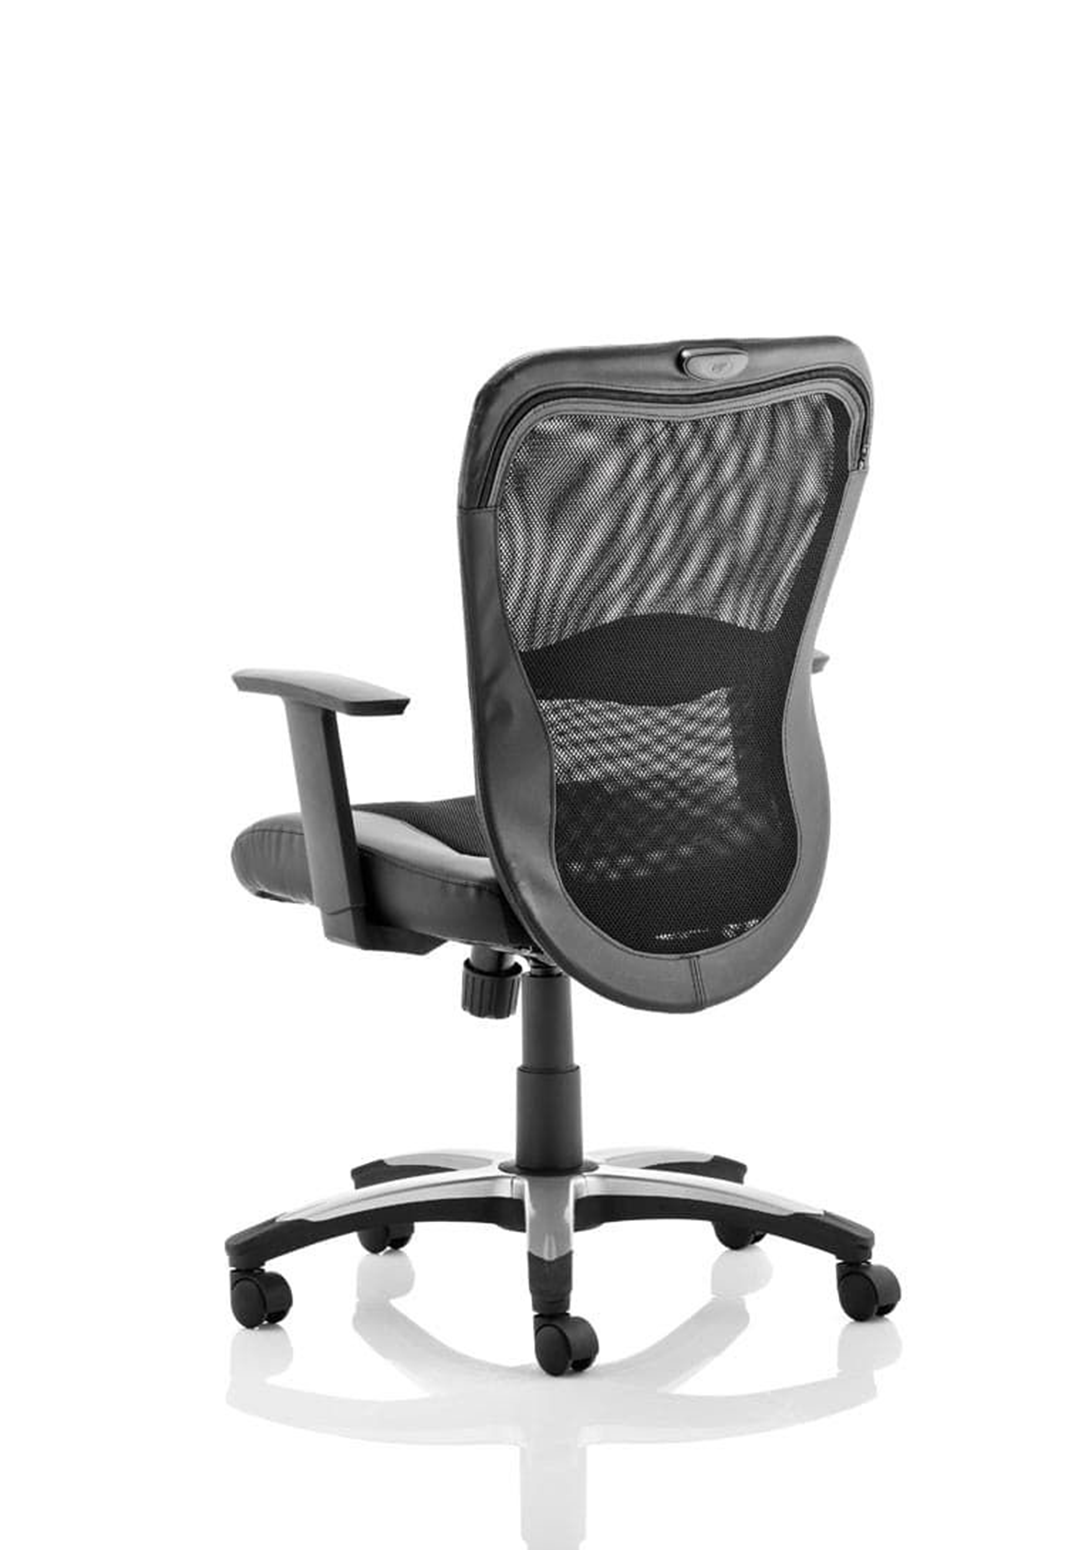 Victor II Exec Home Office Chair | Executive Chair | Home Office Furniture | Leather and Mesh Chair | Chrome detail | Swivel Chair | Swivel Chair with mesh